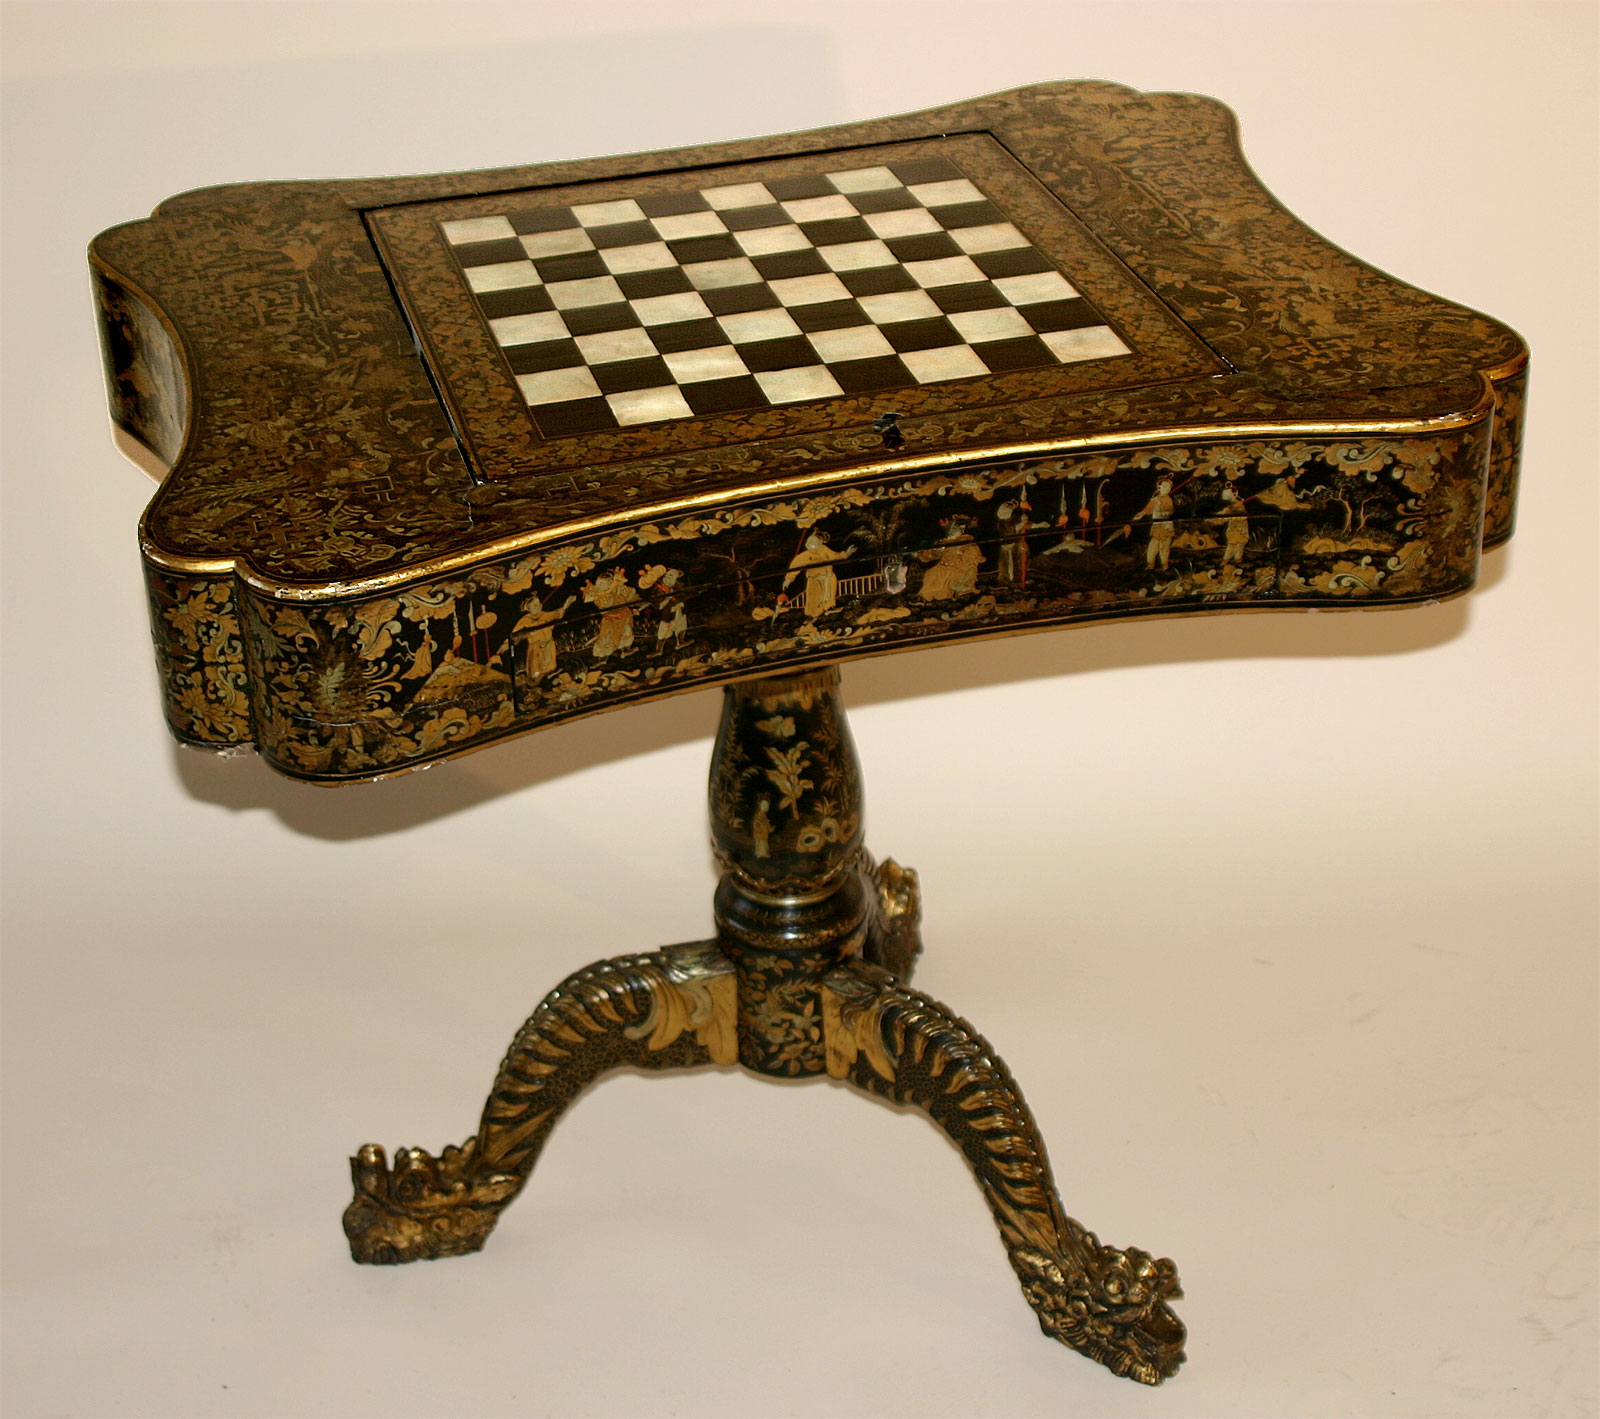 Very fine, Chinese export, black lacquer and parcel-gilt games table